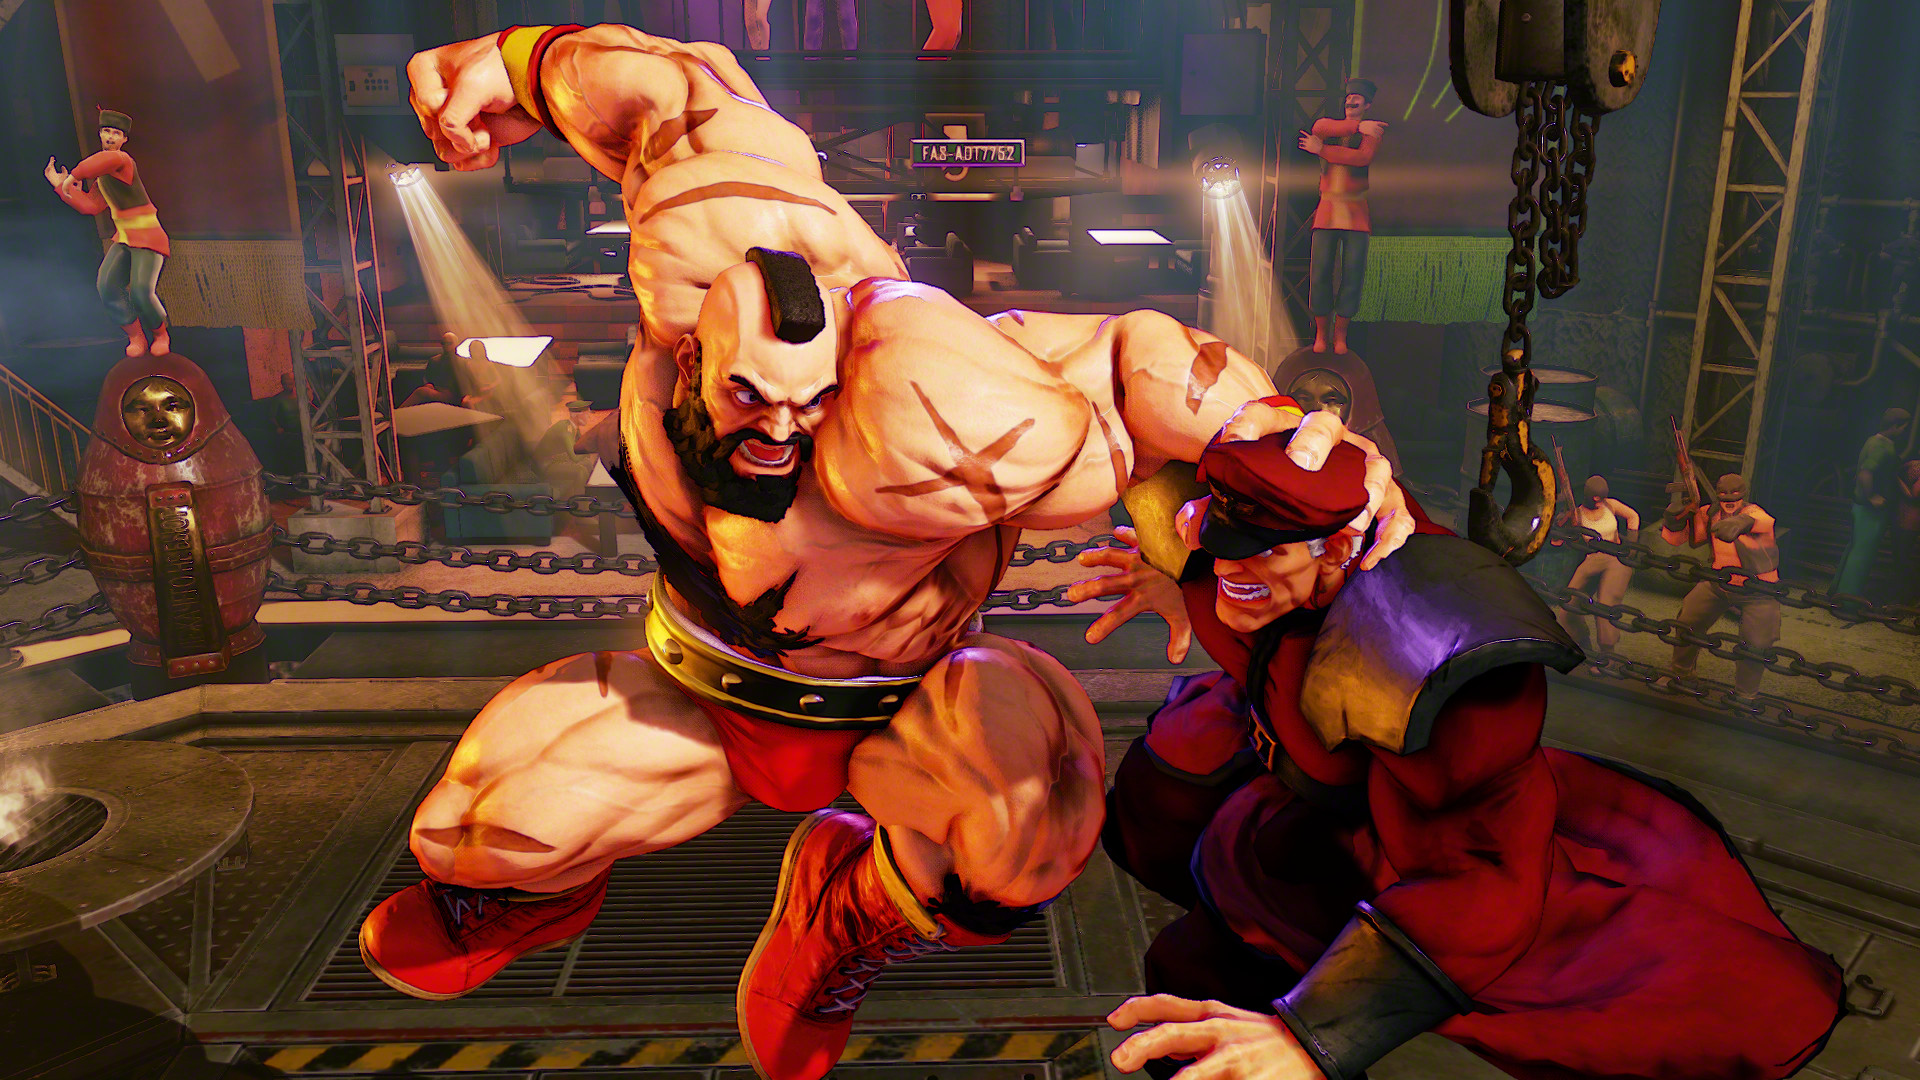 1920x1080 Street Fighter 5 Adds Zangief to Character Roster, Gameplay .